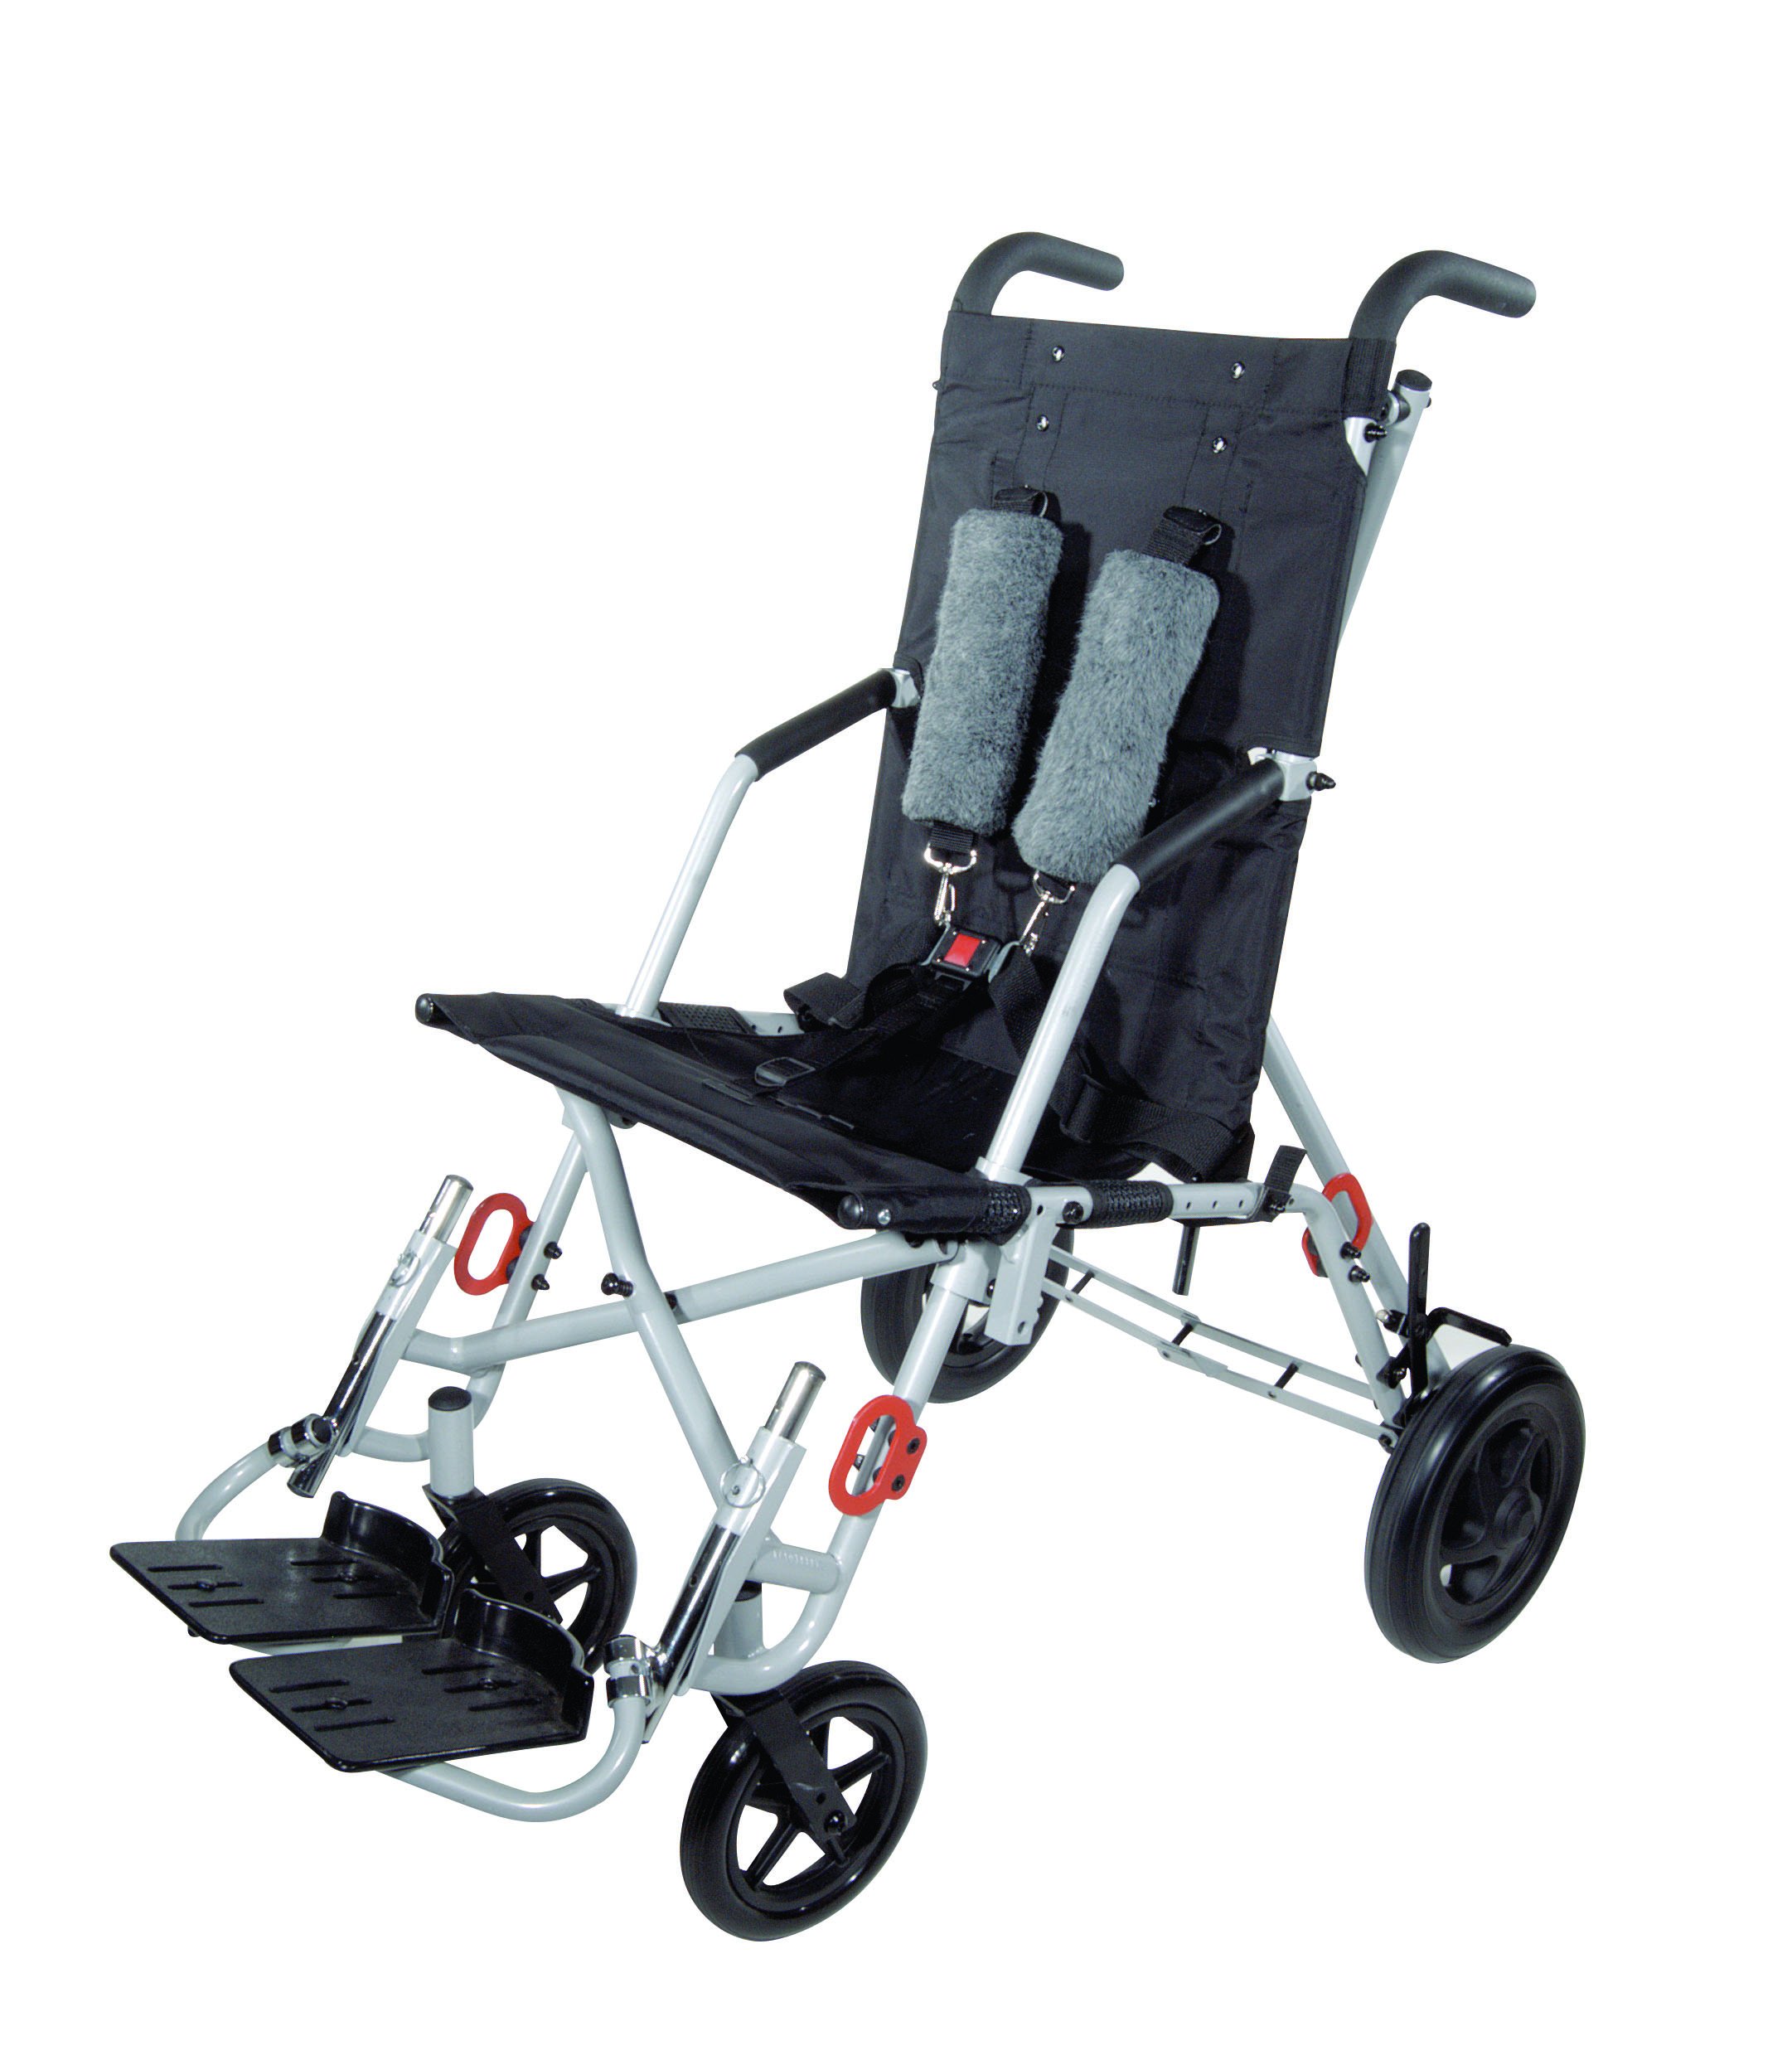 Trotter mobility chair